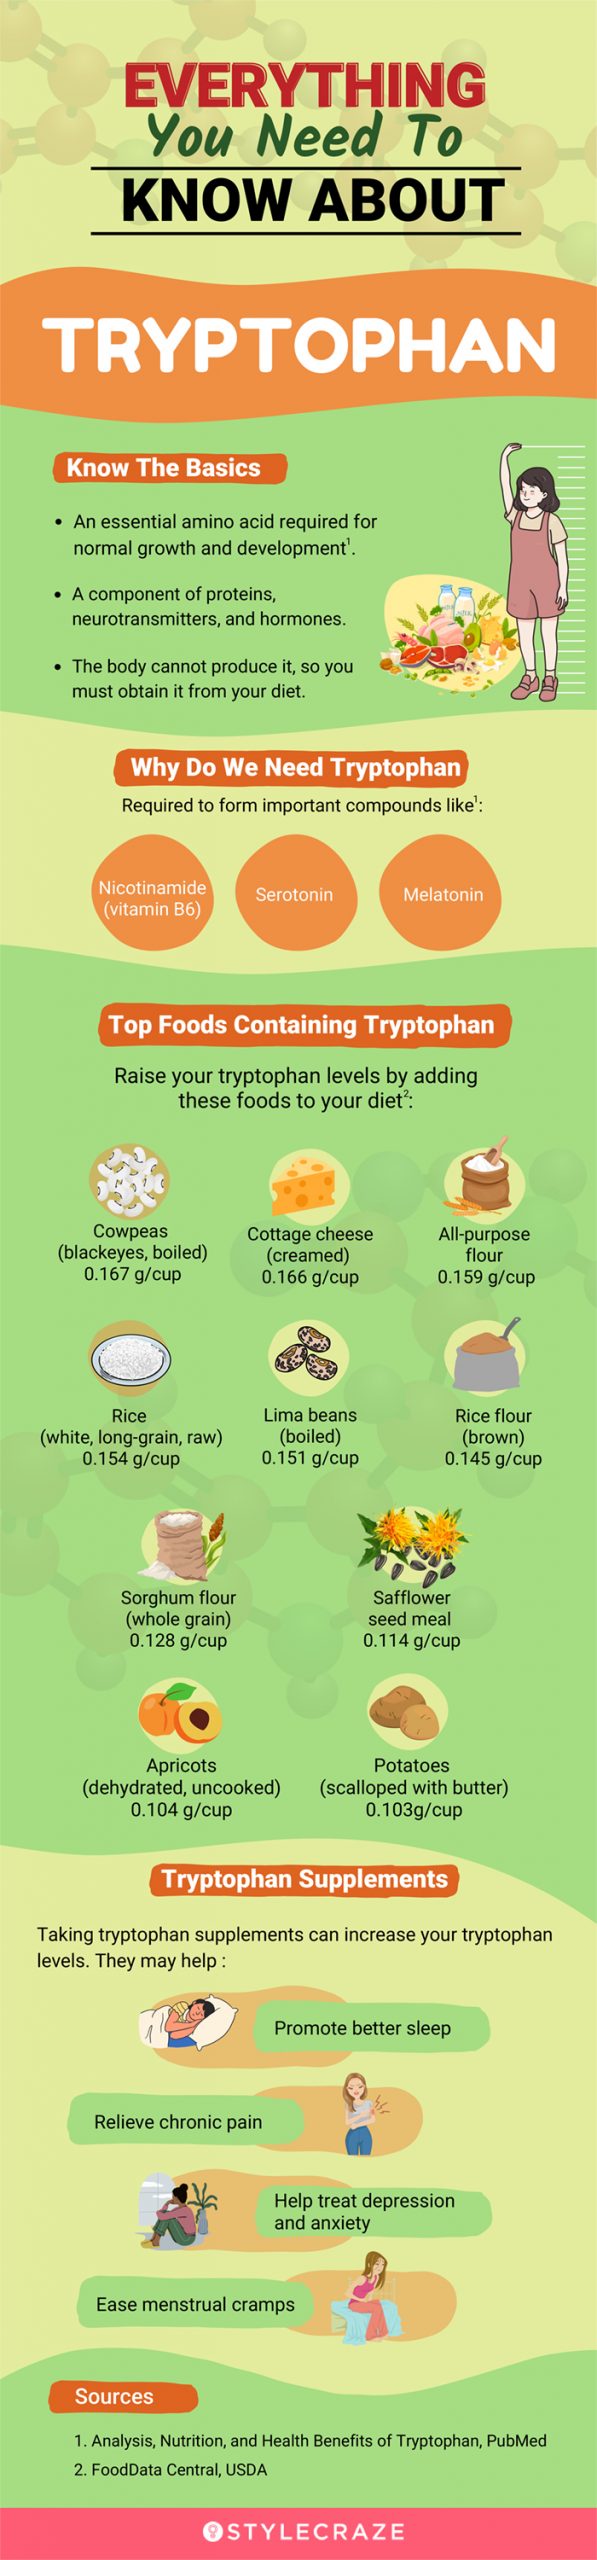 everything about tryptophan (infographic)